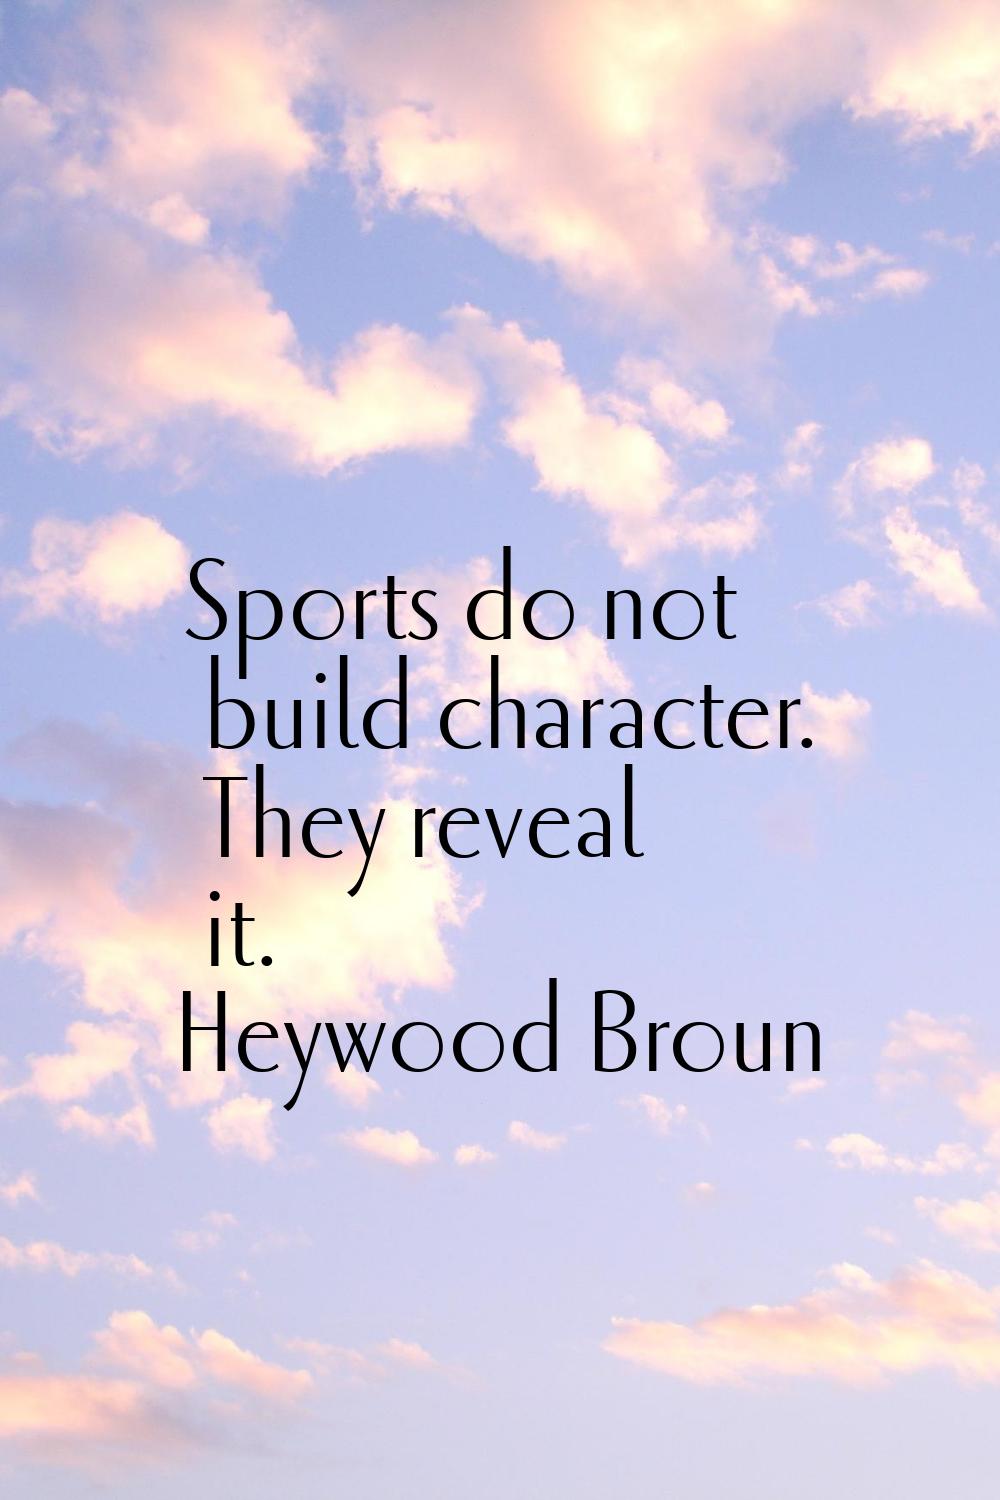 Sports do not build character. They reveal it.